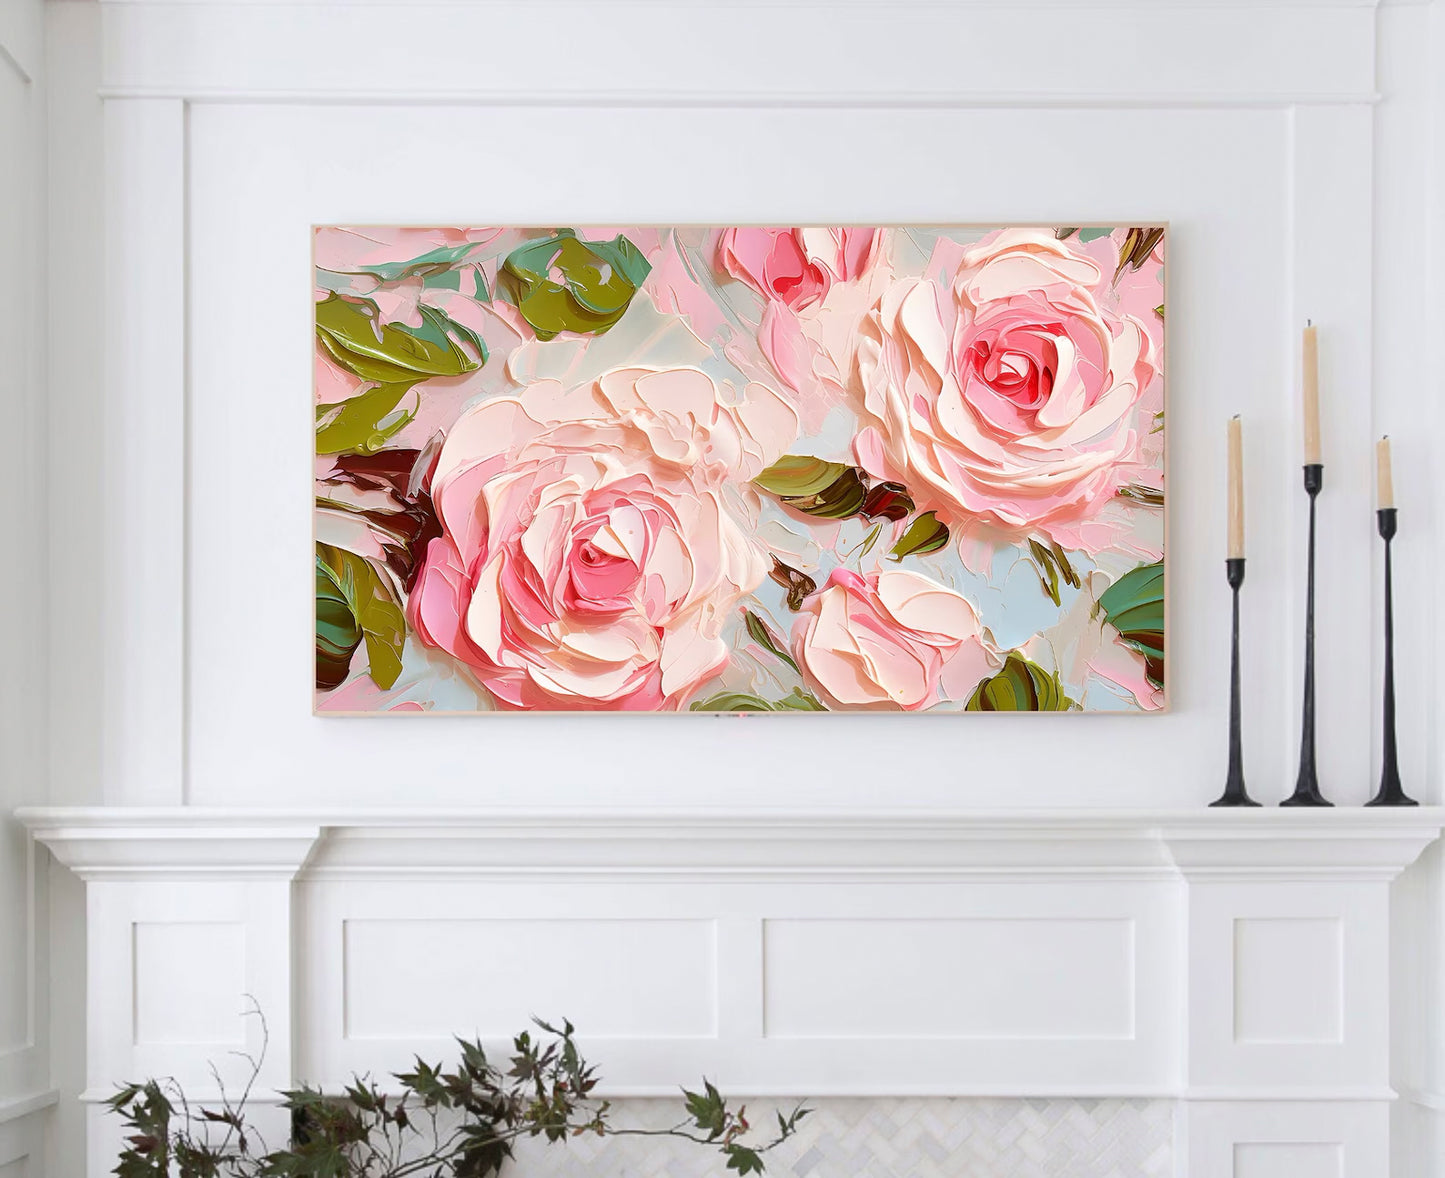 Abstract Pink Rose Frame TV Art